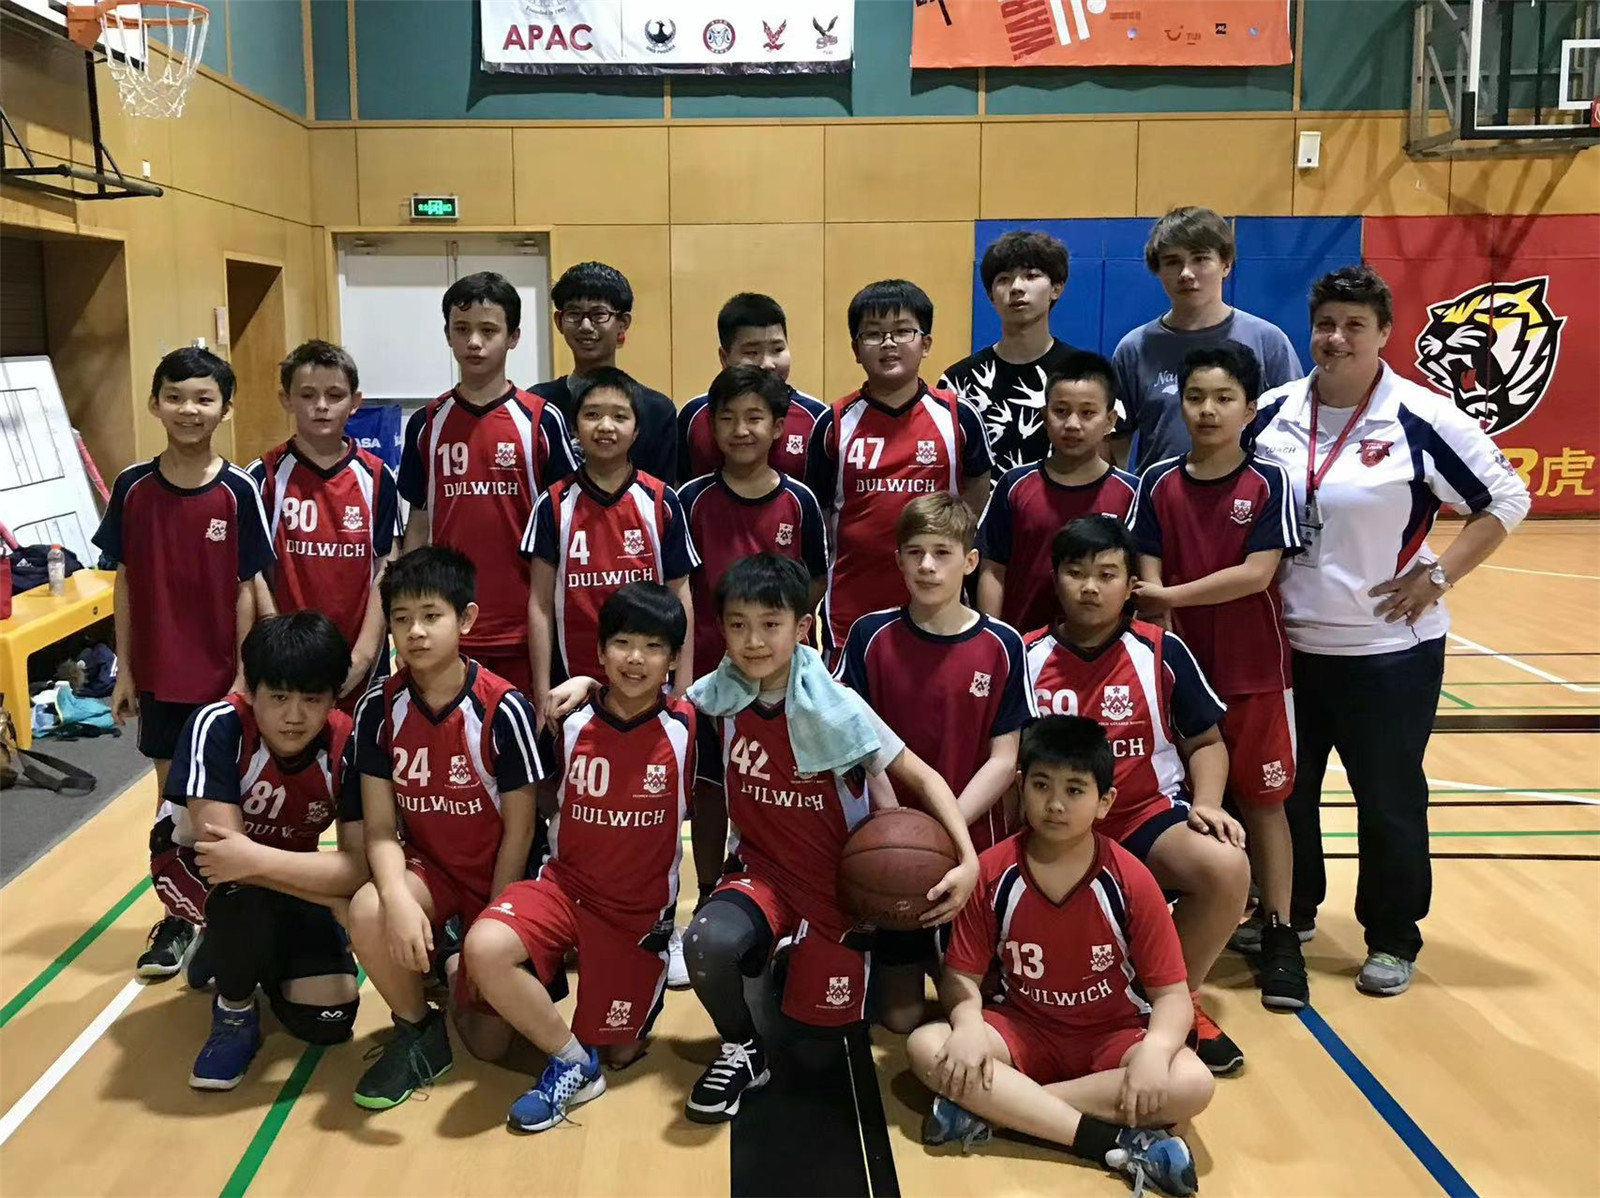 Brian participates in the Year 7 Basketball Team at the ISAC Tournament.